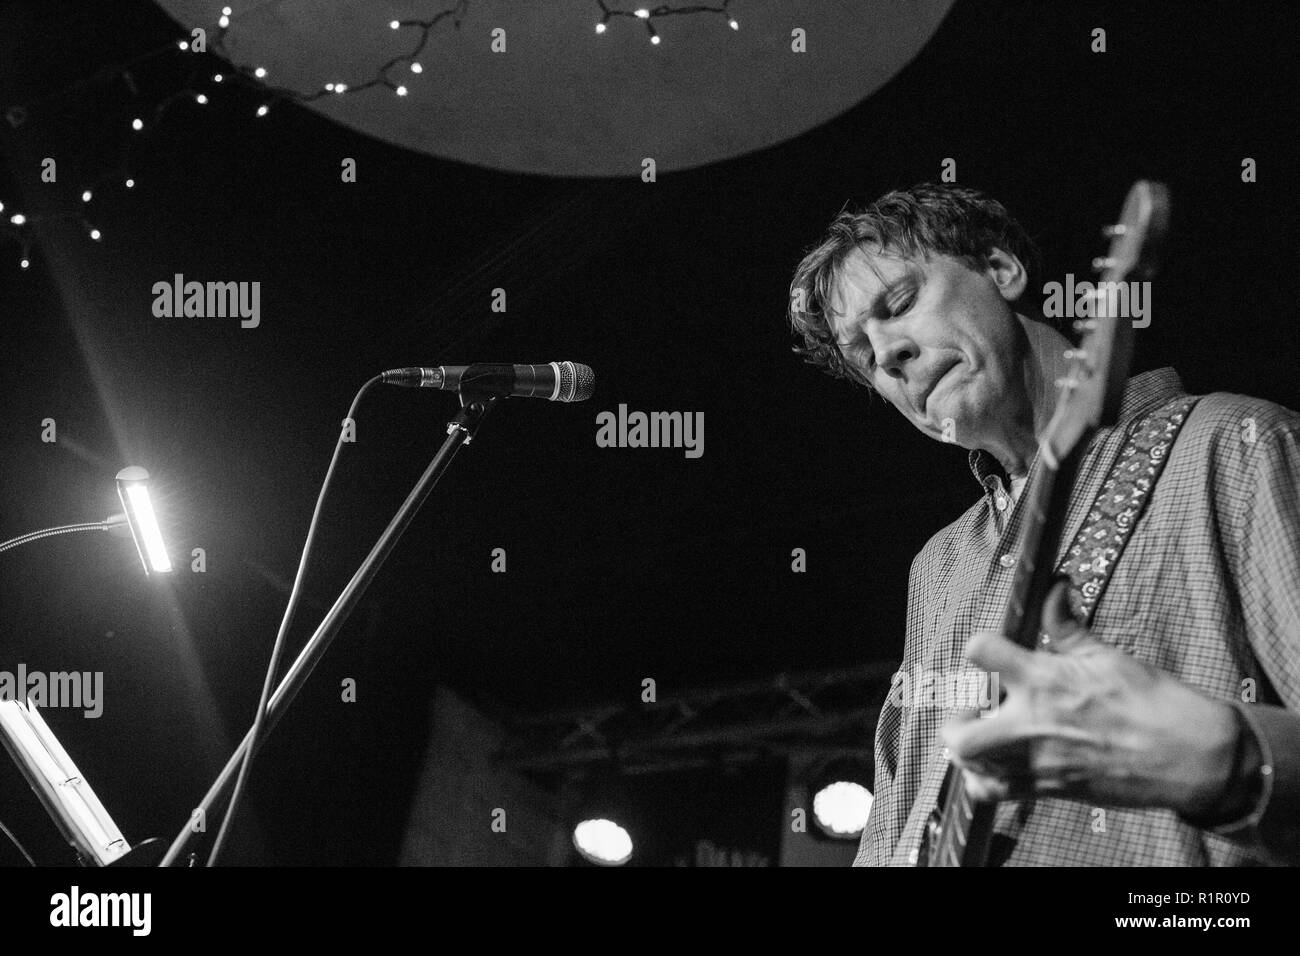 Thurston Moore (Thurston Moore Band, Thurston Moore Group, ex Sonic Youth) - May 2015 - Cluny Newcastle - Live concert photography Stock Photo